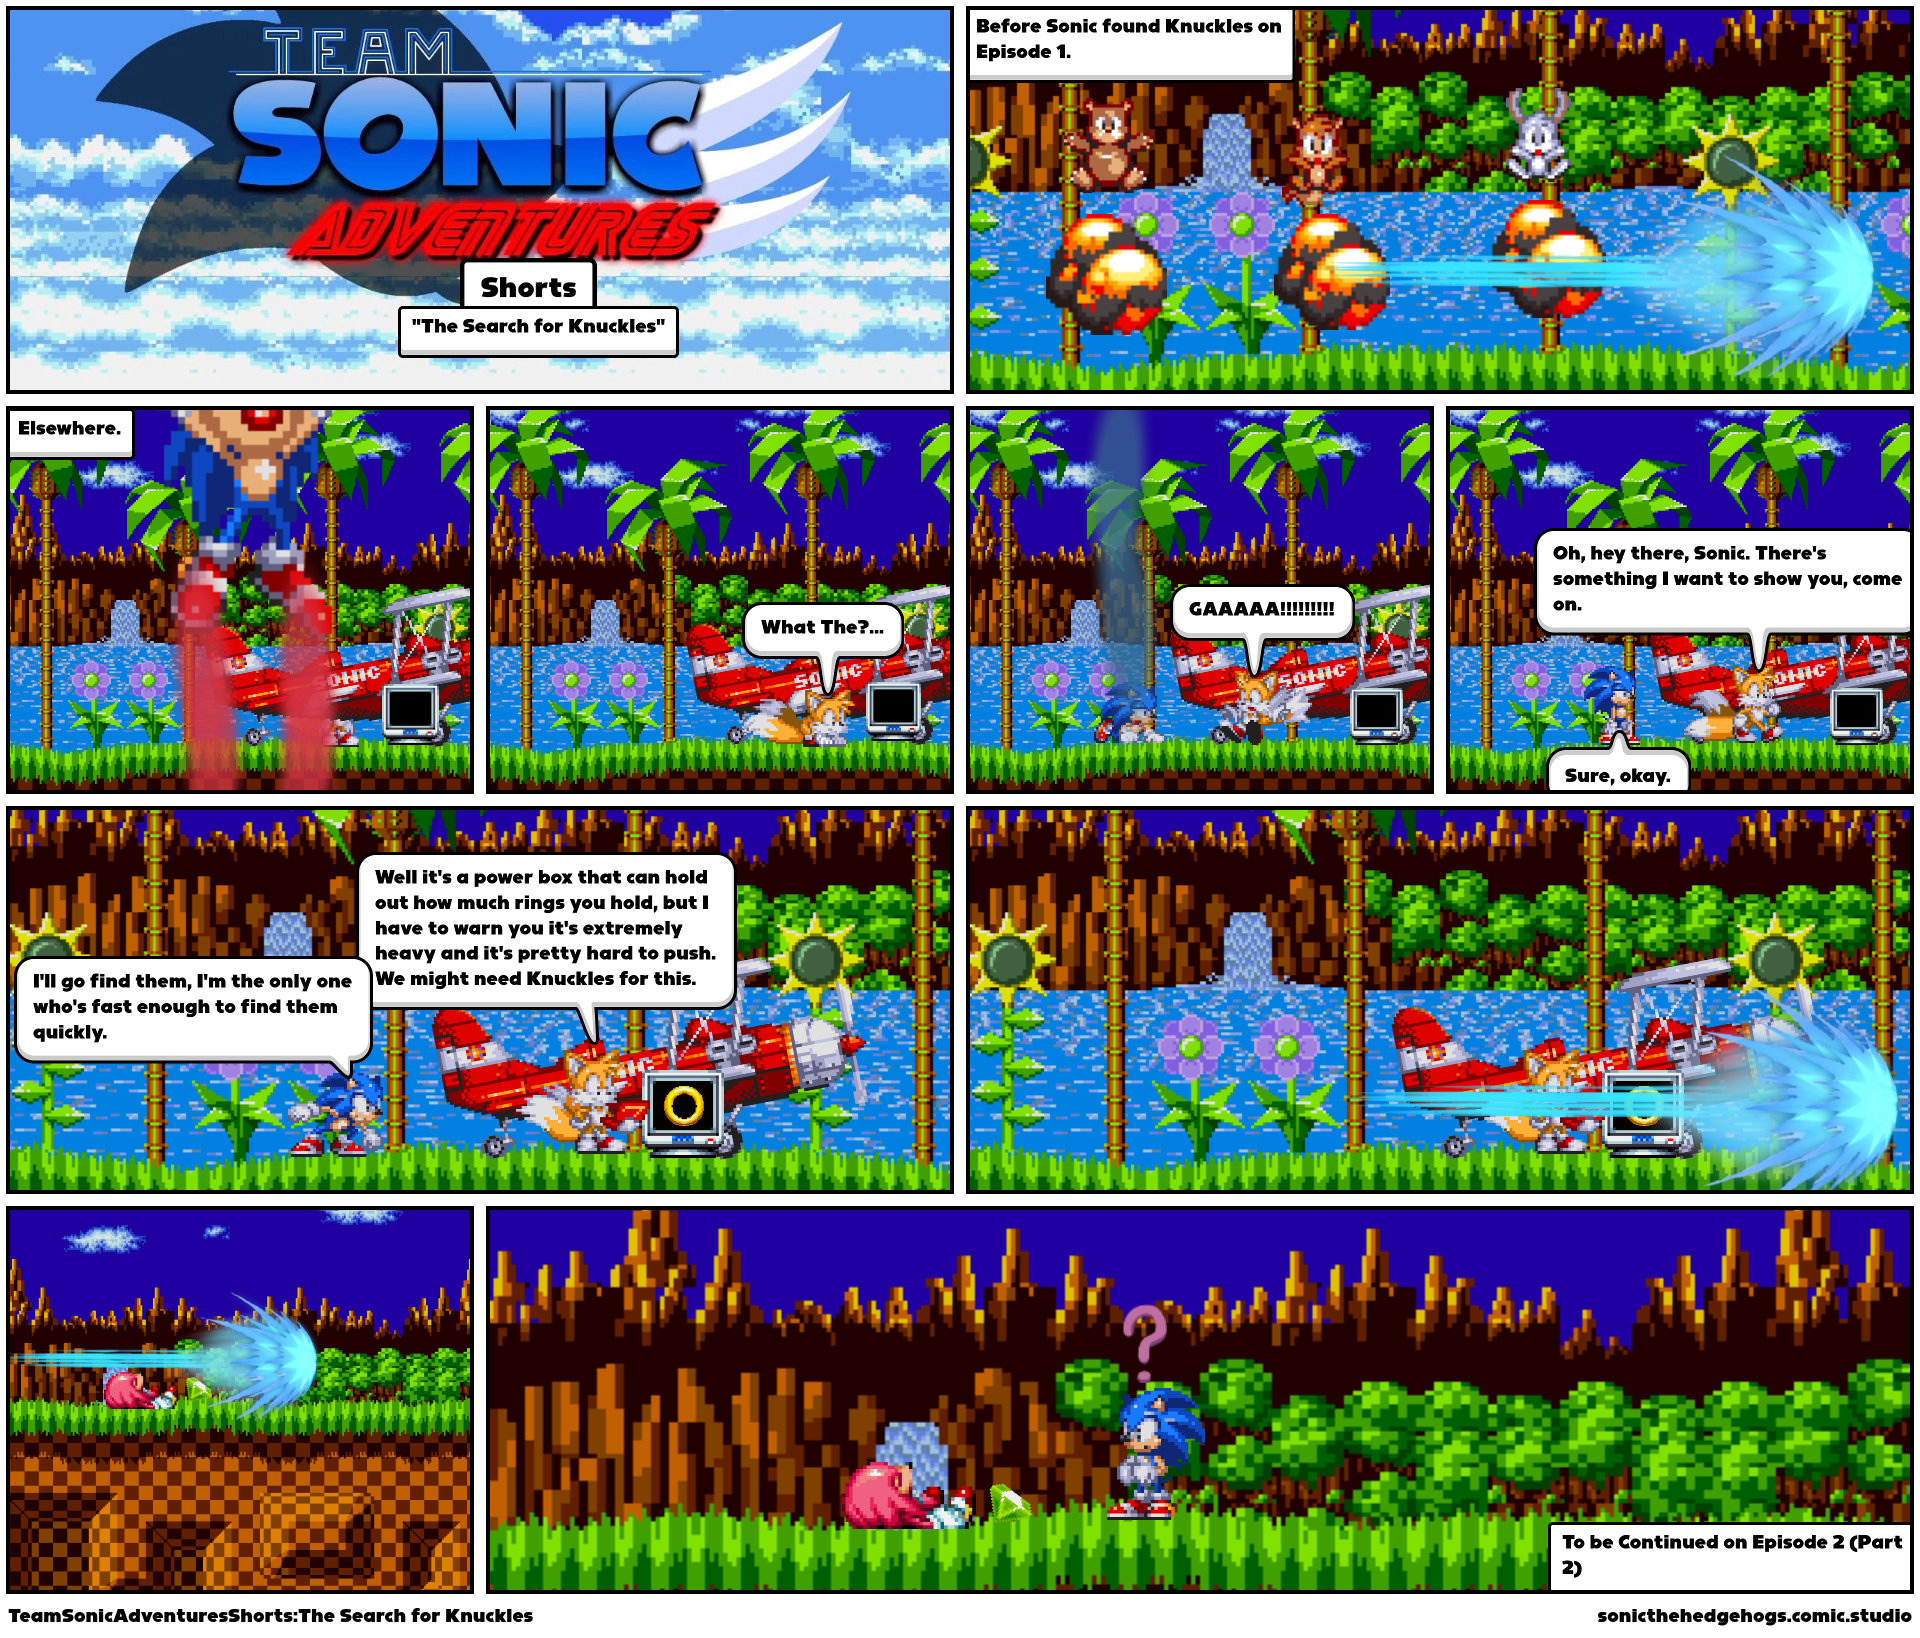 TeamSonicAdventuresShorts:The Search for Knuckles